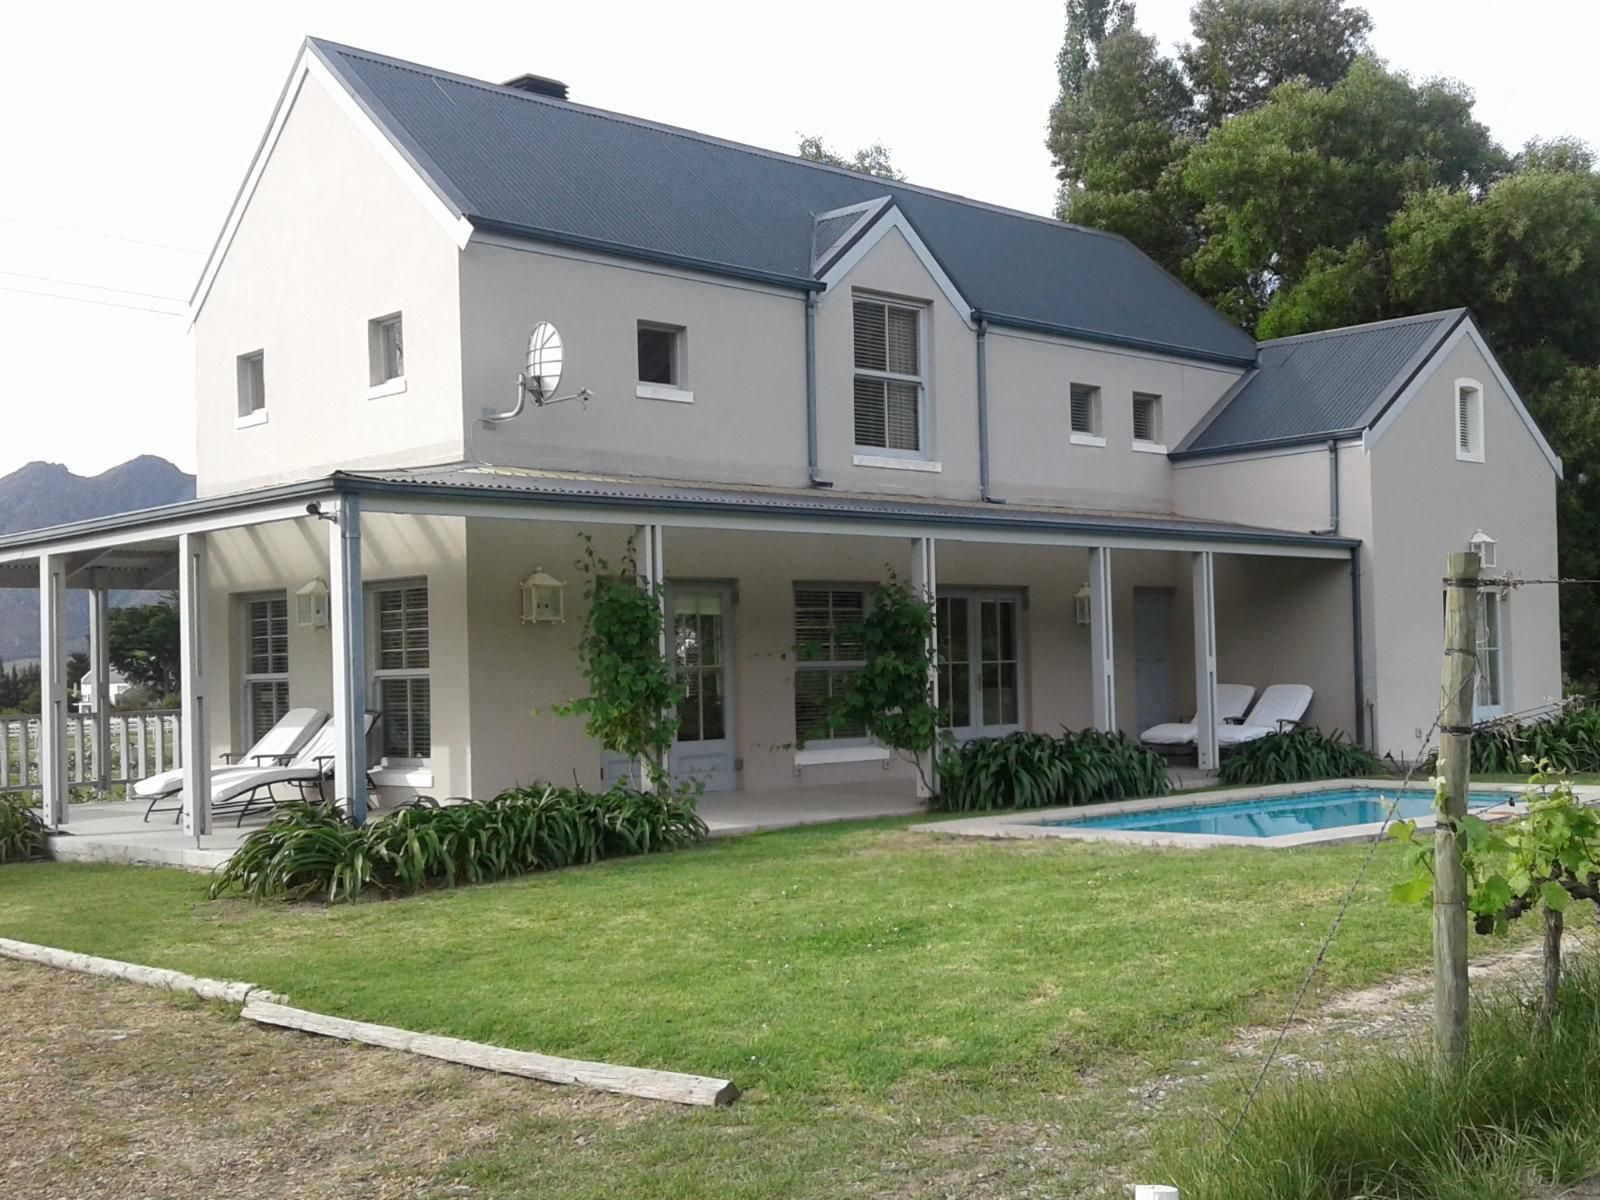 Rose Cottage Franschhoek Western Cape South Africa Building, Architecture, House